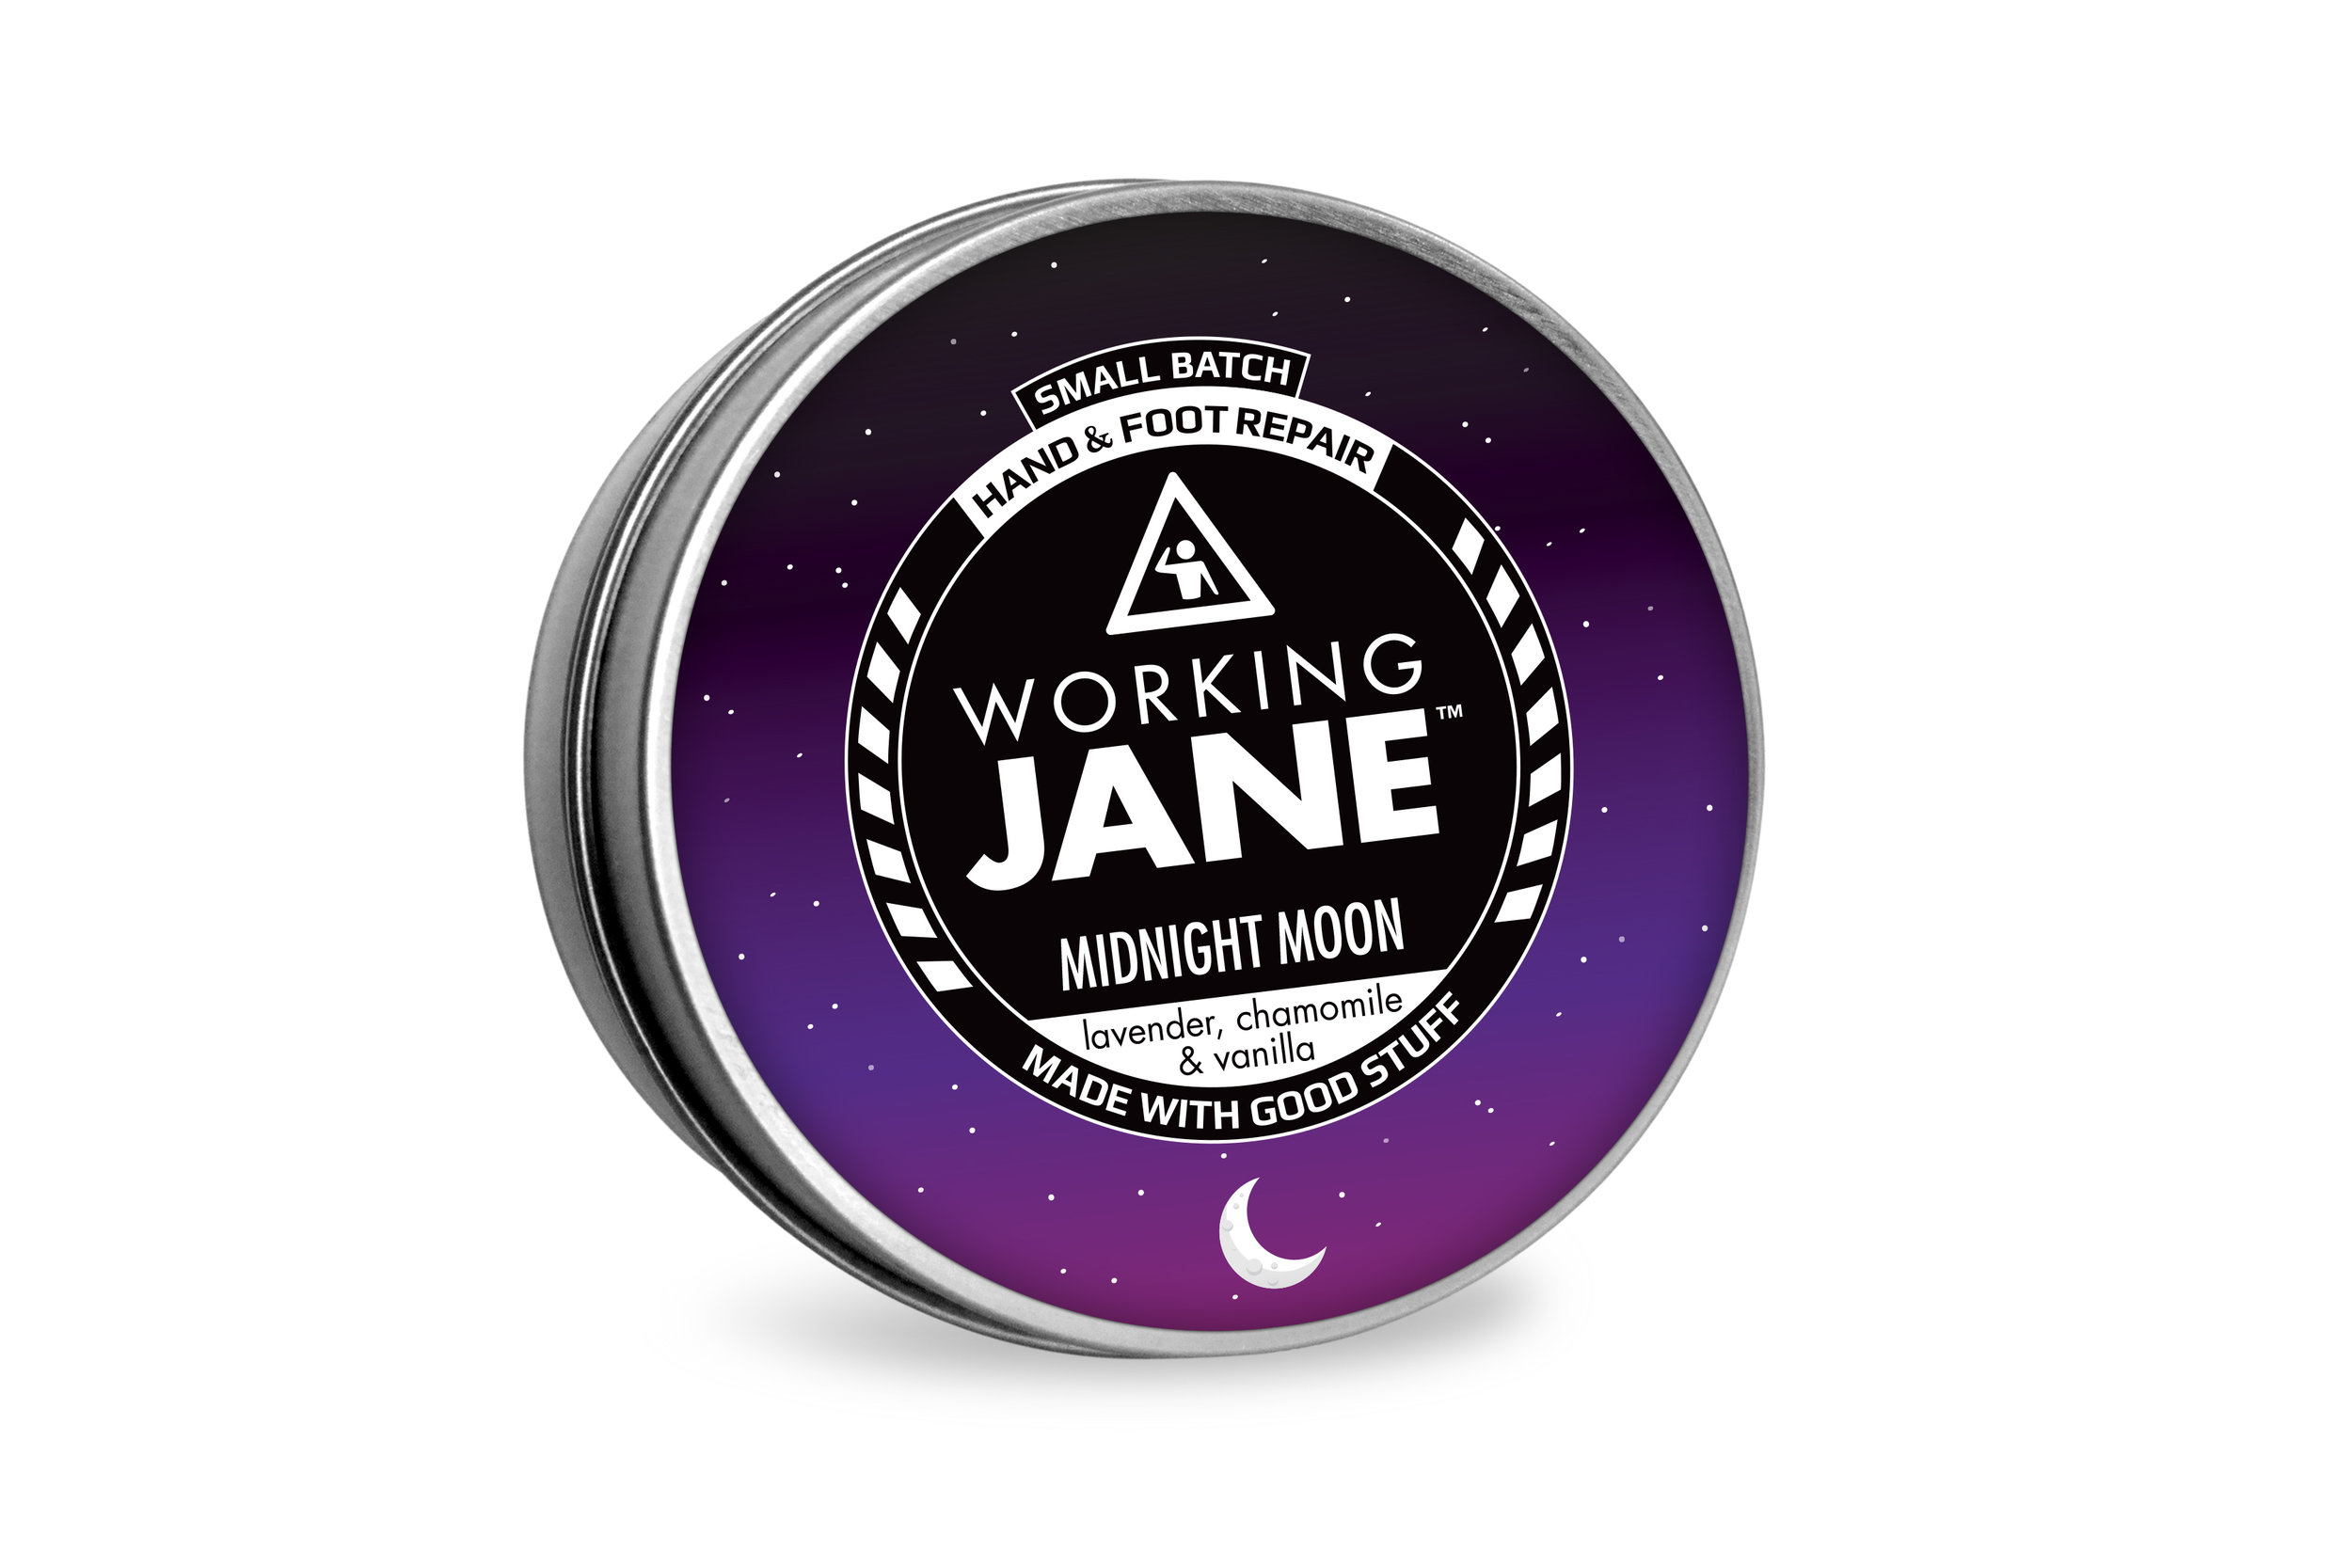 wj-midnight-moon-jane_large.png